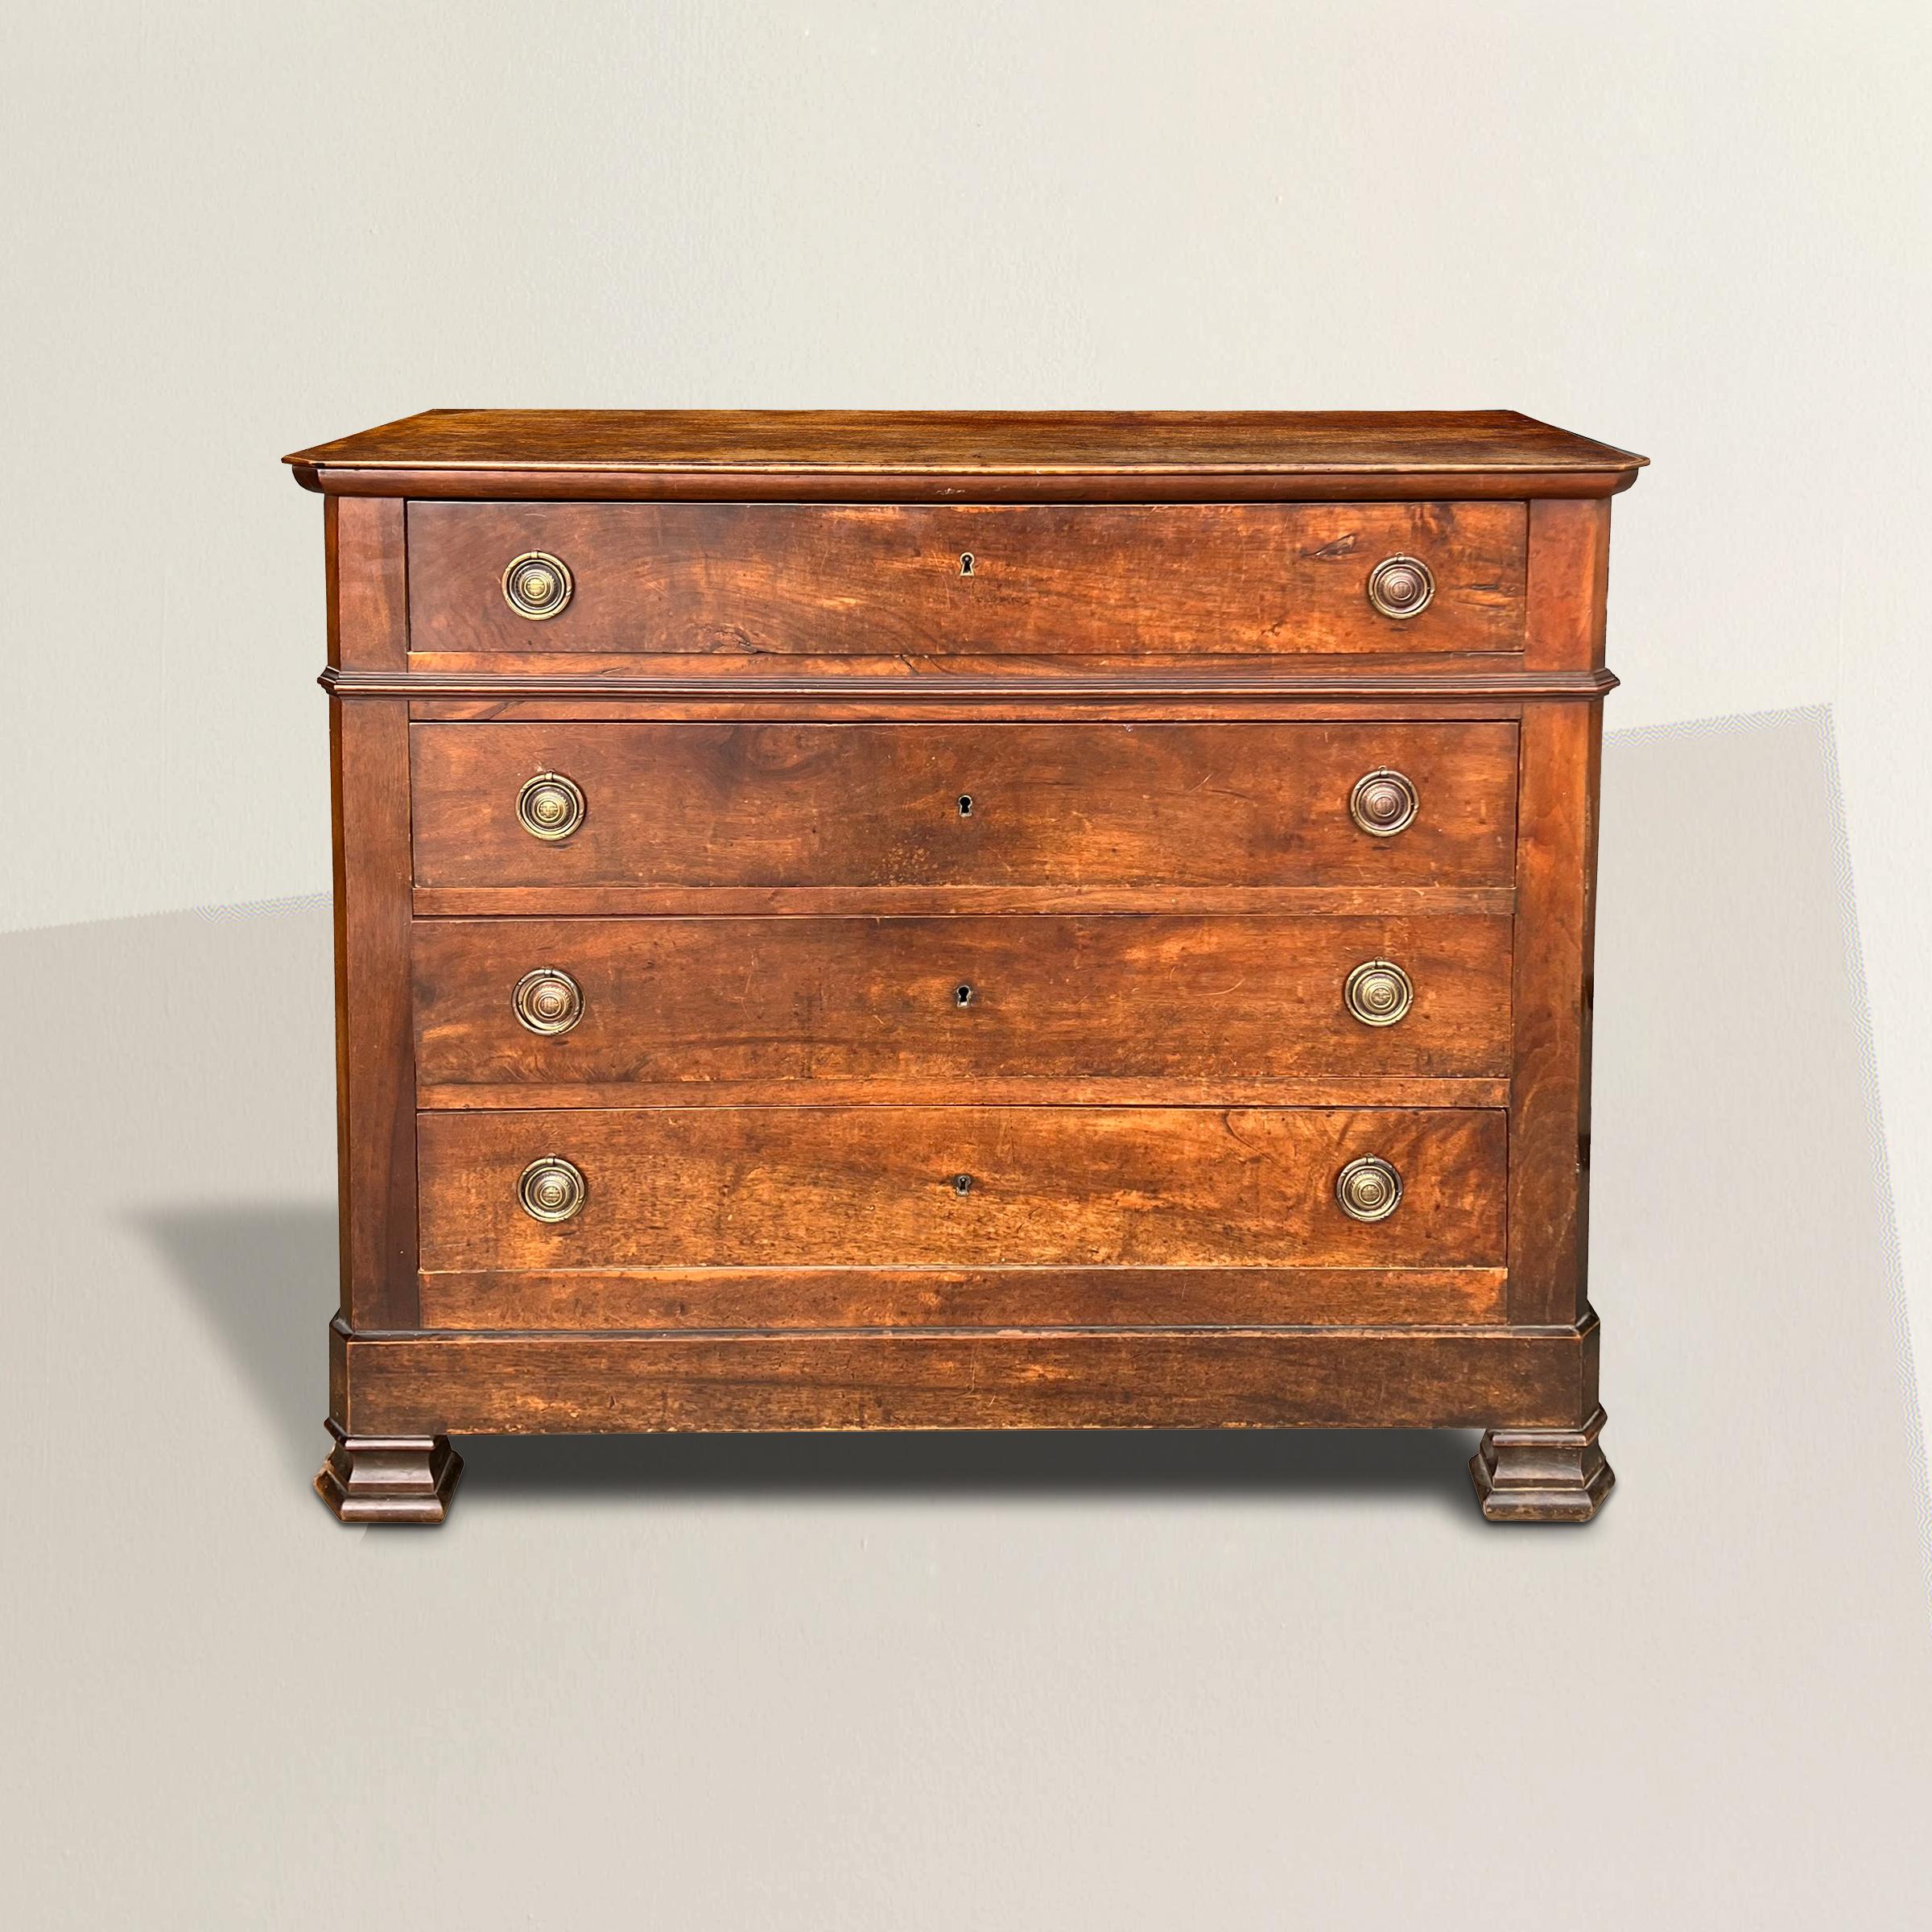 A simple but chic early 19th century French Louis Philippe period walnut chest with four drawers with newer brass ring pulls, and a wonderful, unusual, plaid patterned top. Perfect as a dresser in your bedroom or guest room, a console in you entry,